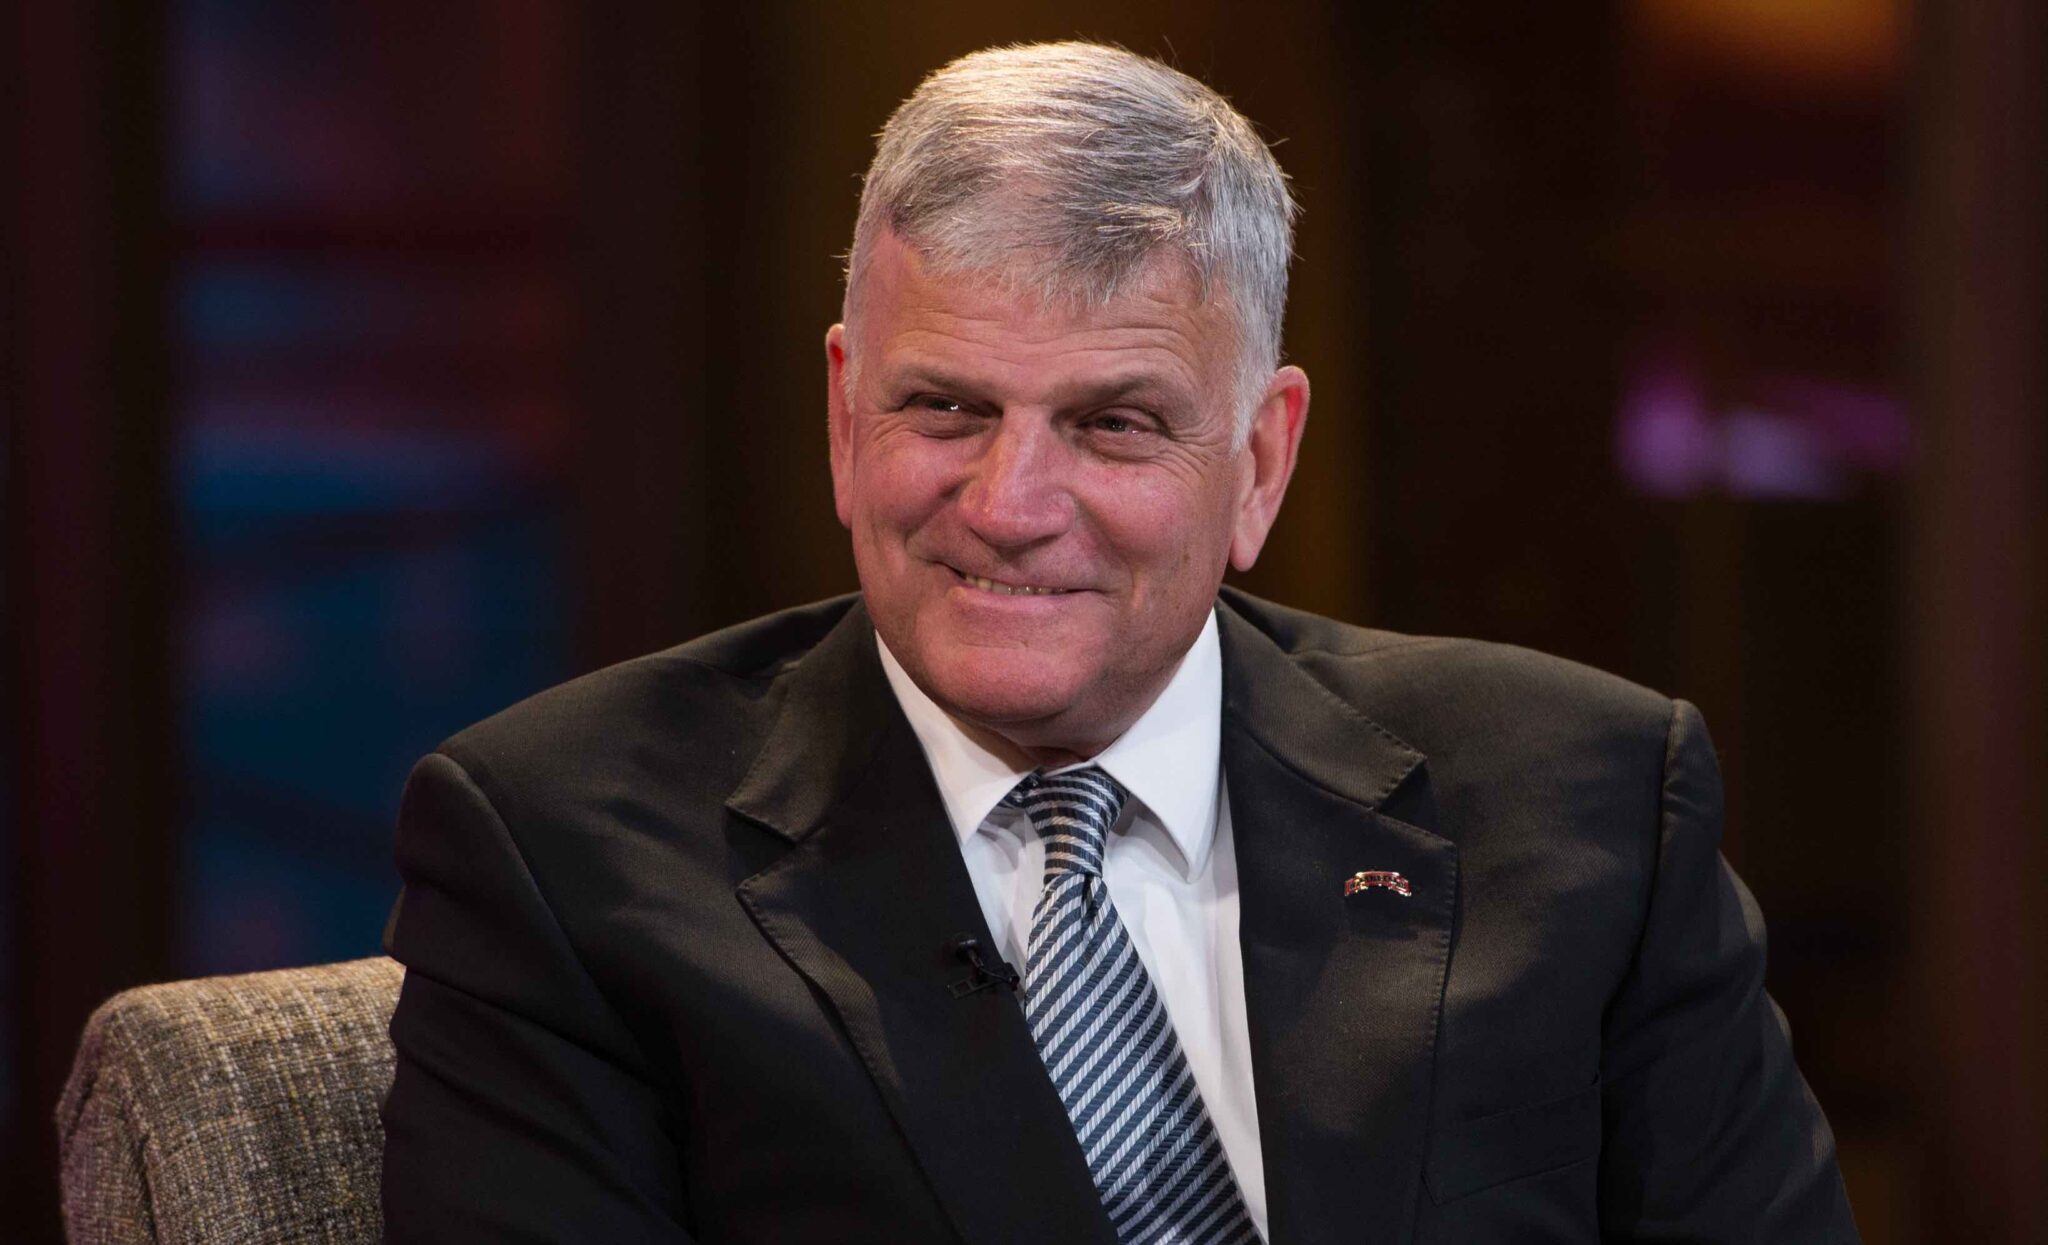 700 People Give Their Lives to Christ during Franklin Graham's 'God